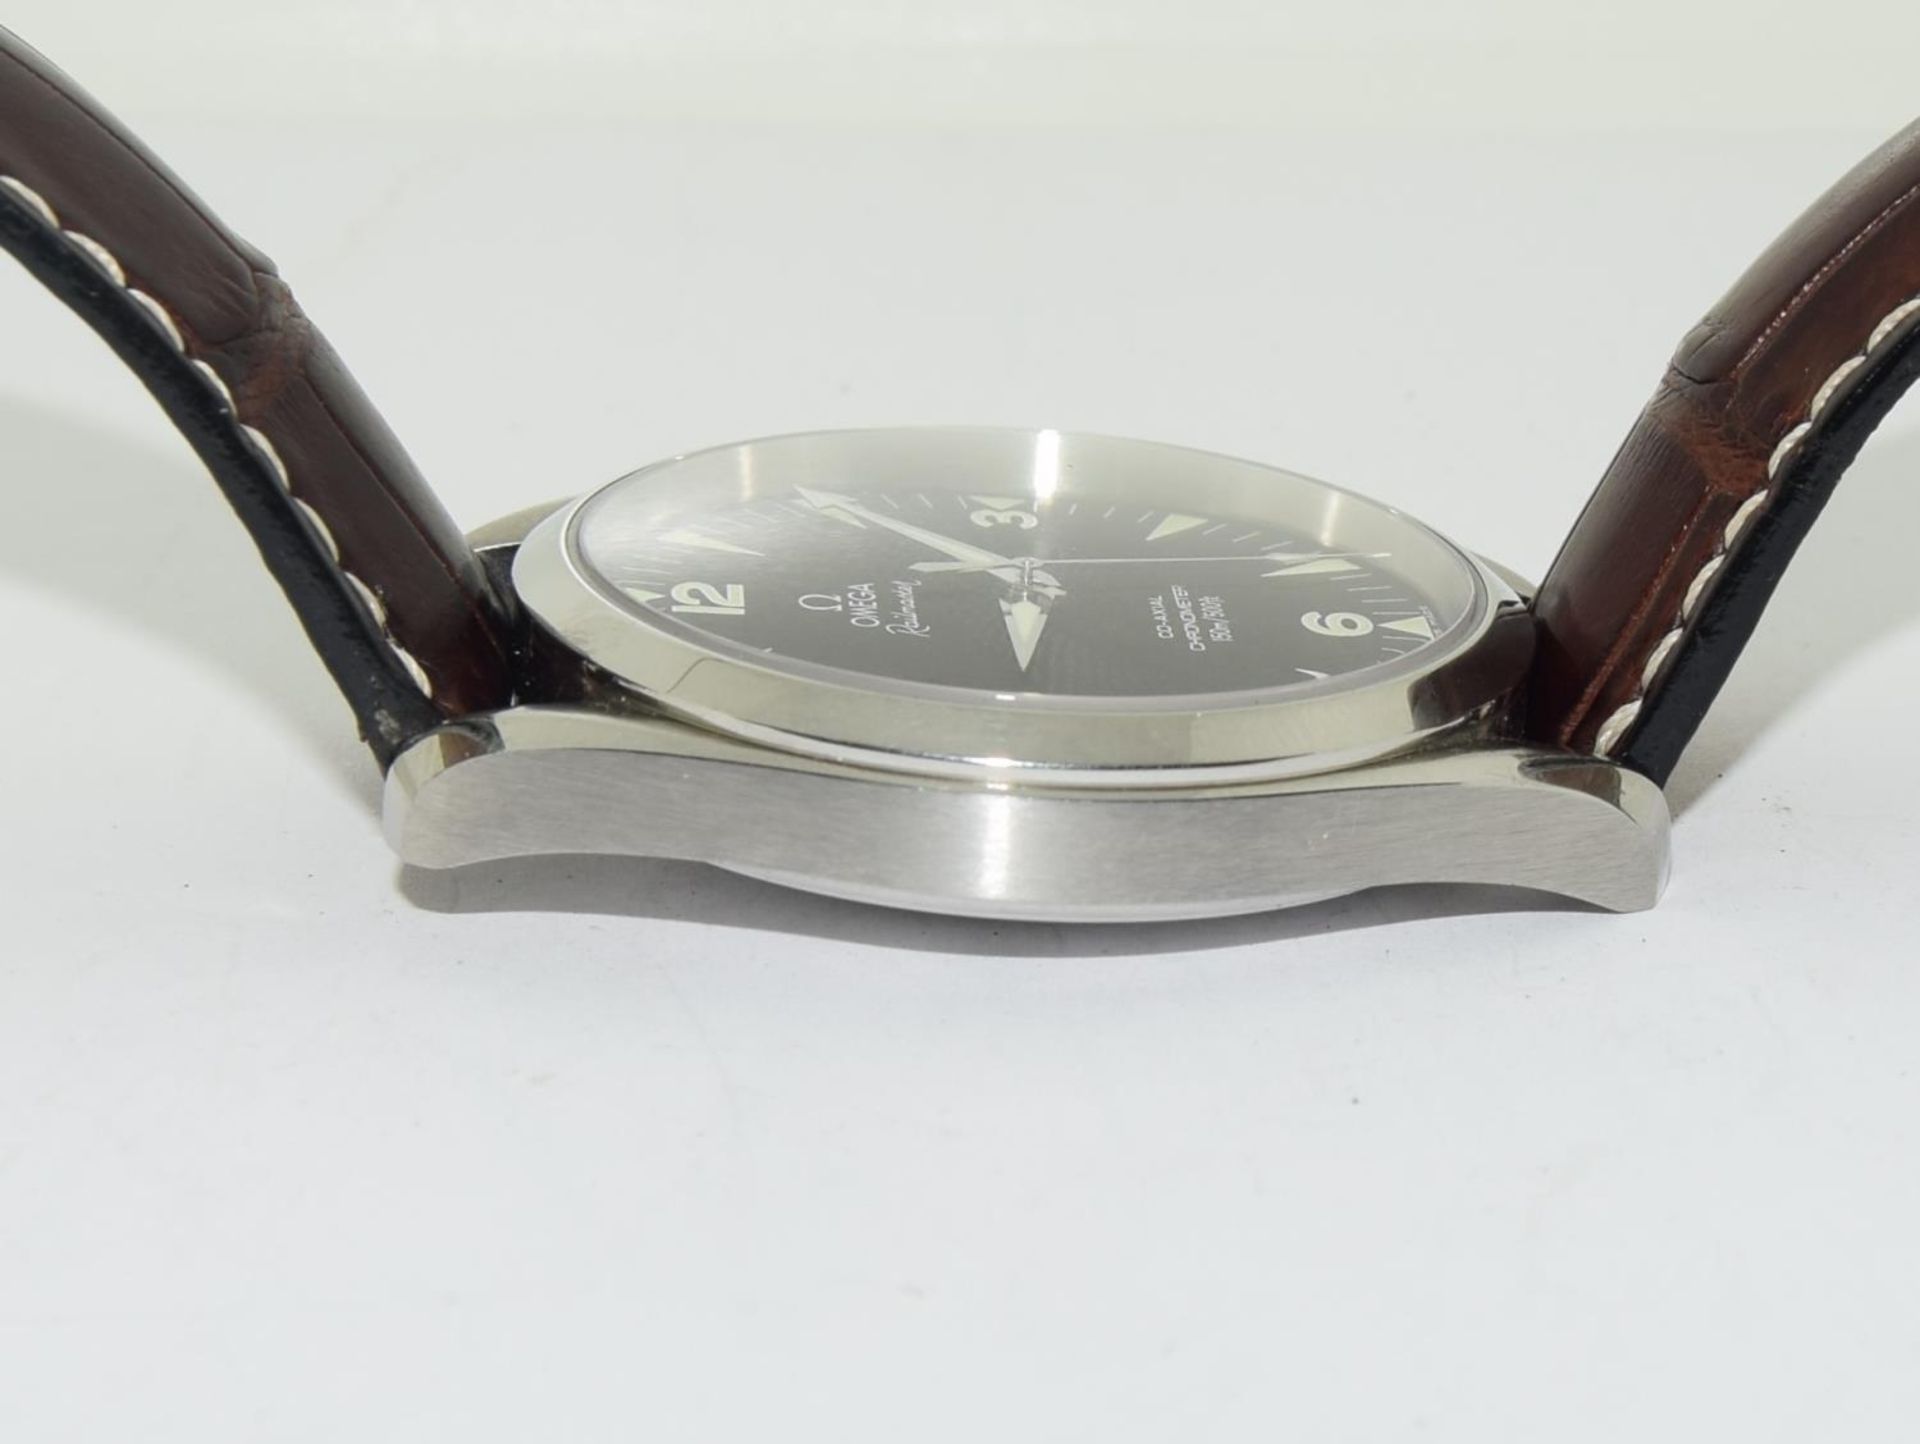 Omega Gents Railmaster, 42mm, boxed and papers, from 2003 - Image 7 of 9